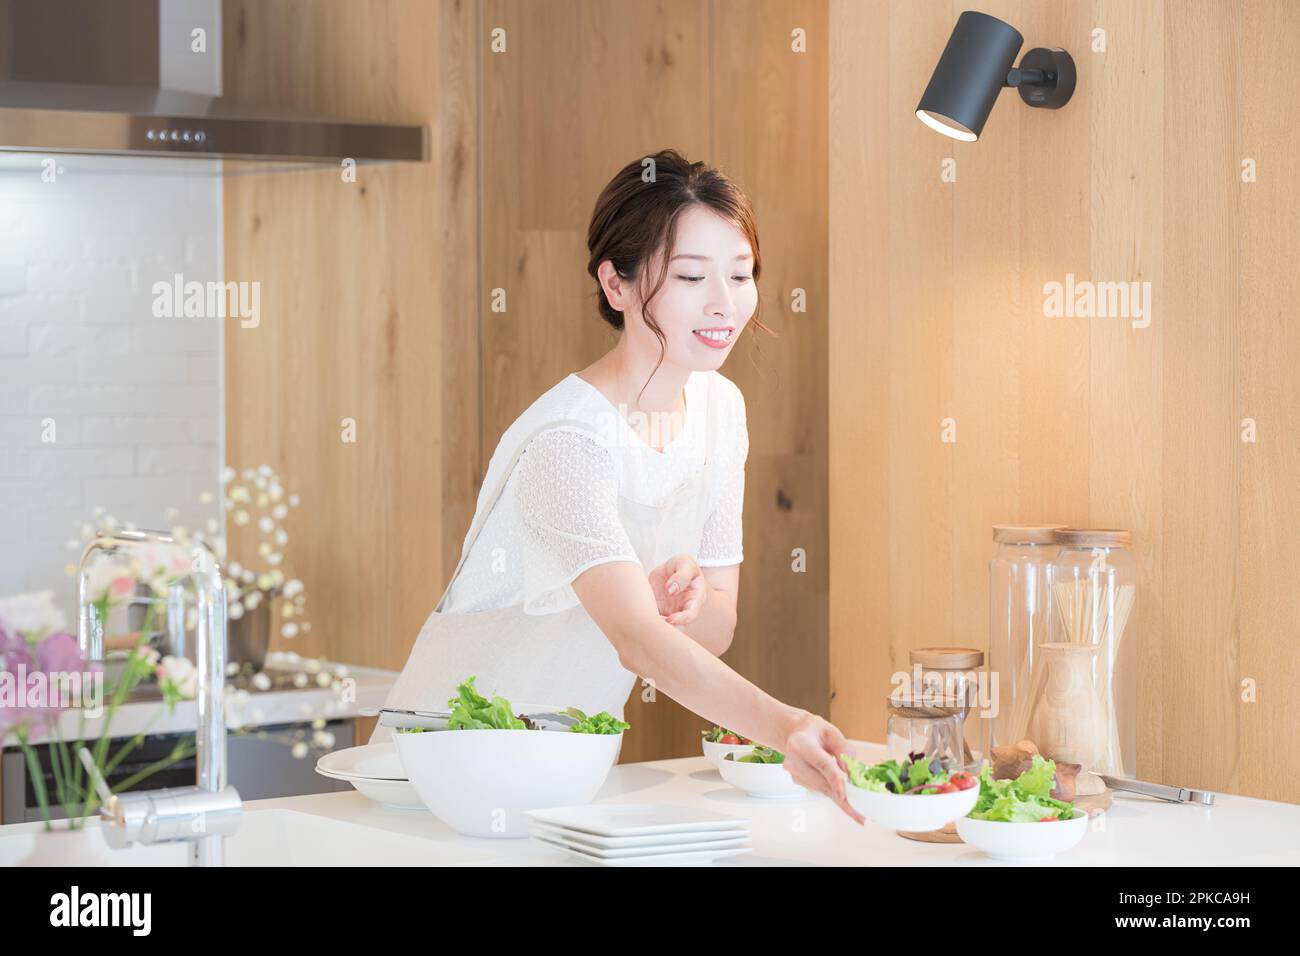 Woman serving a meal in the kitchen Stock Photo